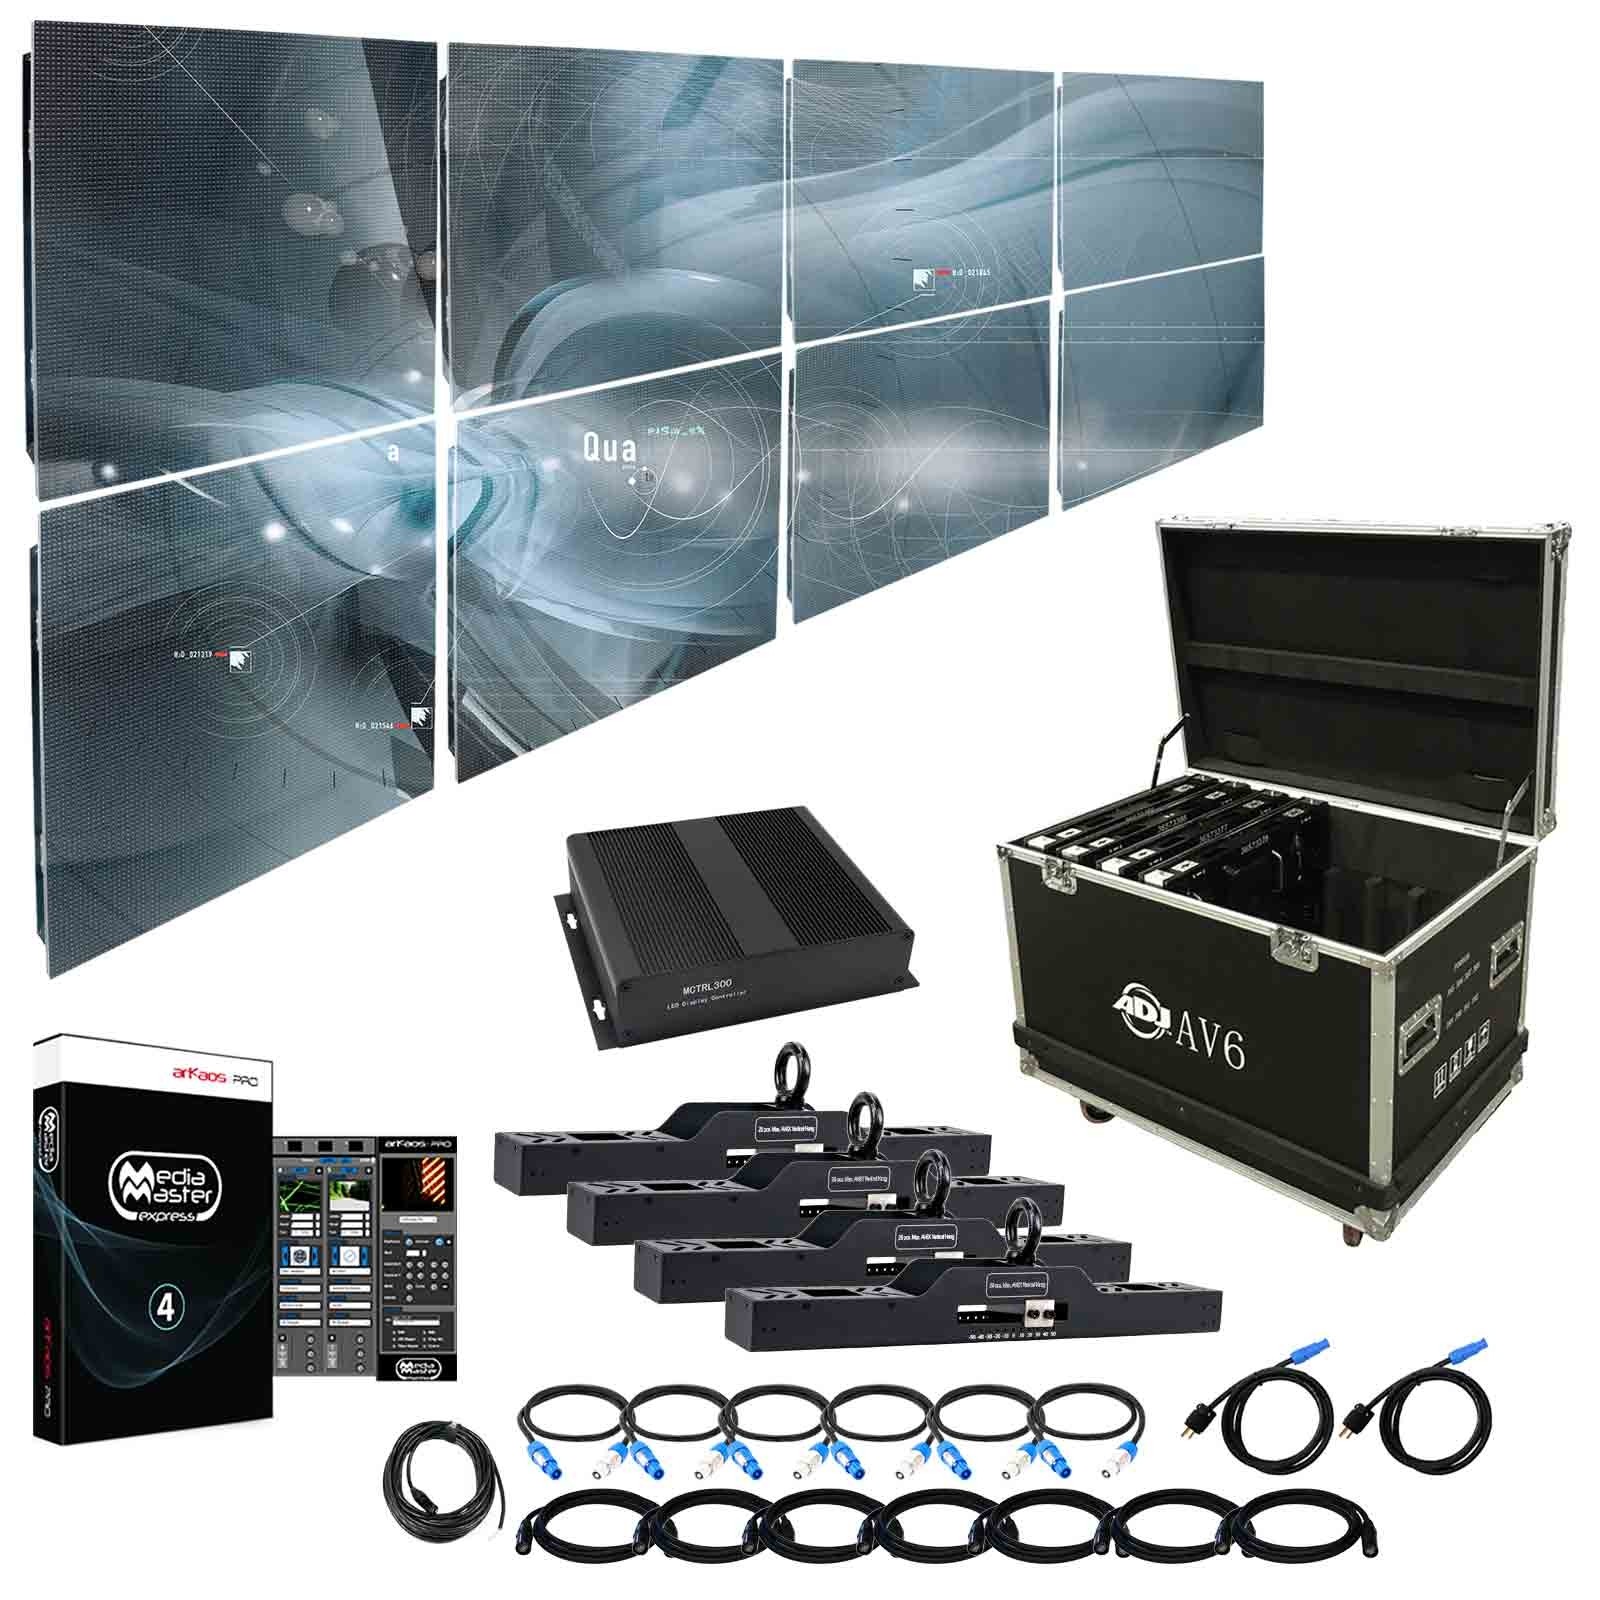 american-dj-av6x-6mm-led-video-wall-4x2-complete-system-package-with-rigging-bars-and-road-cases-8d8